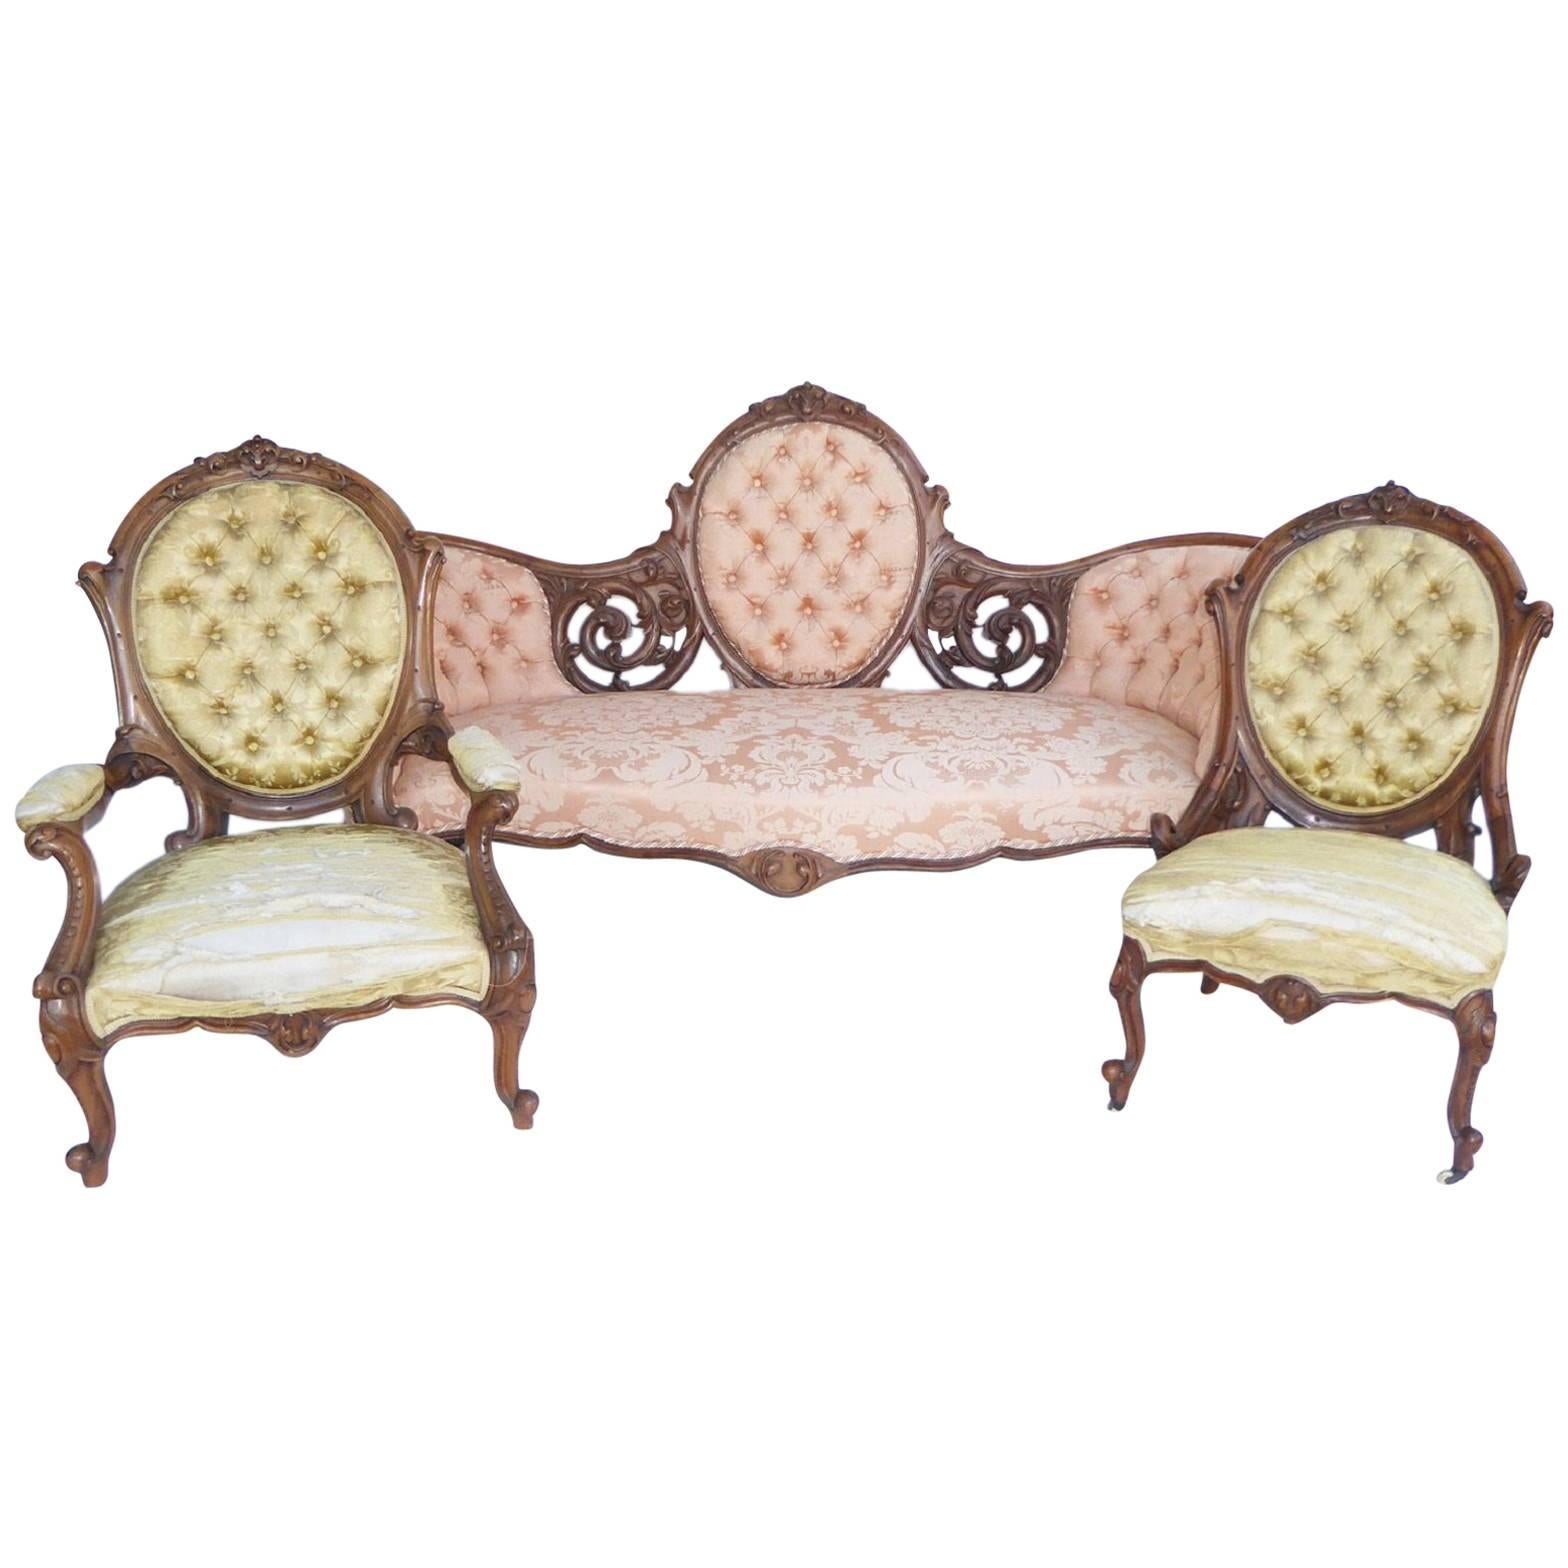 Victorian Walnut Sofa, Ladies and Gents Chairs